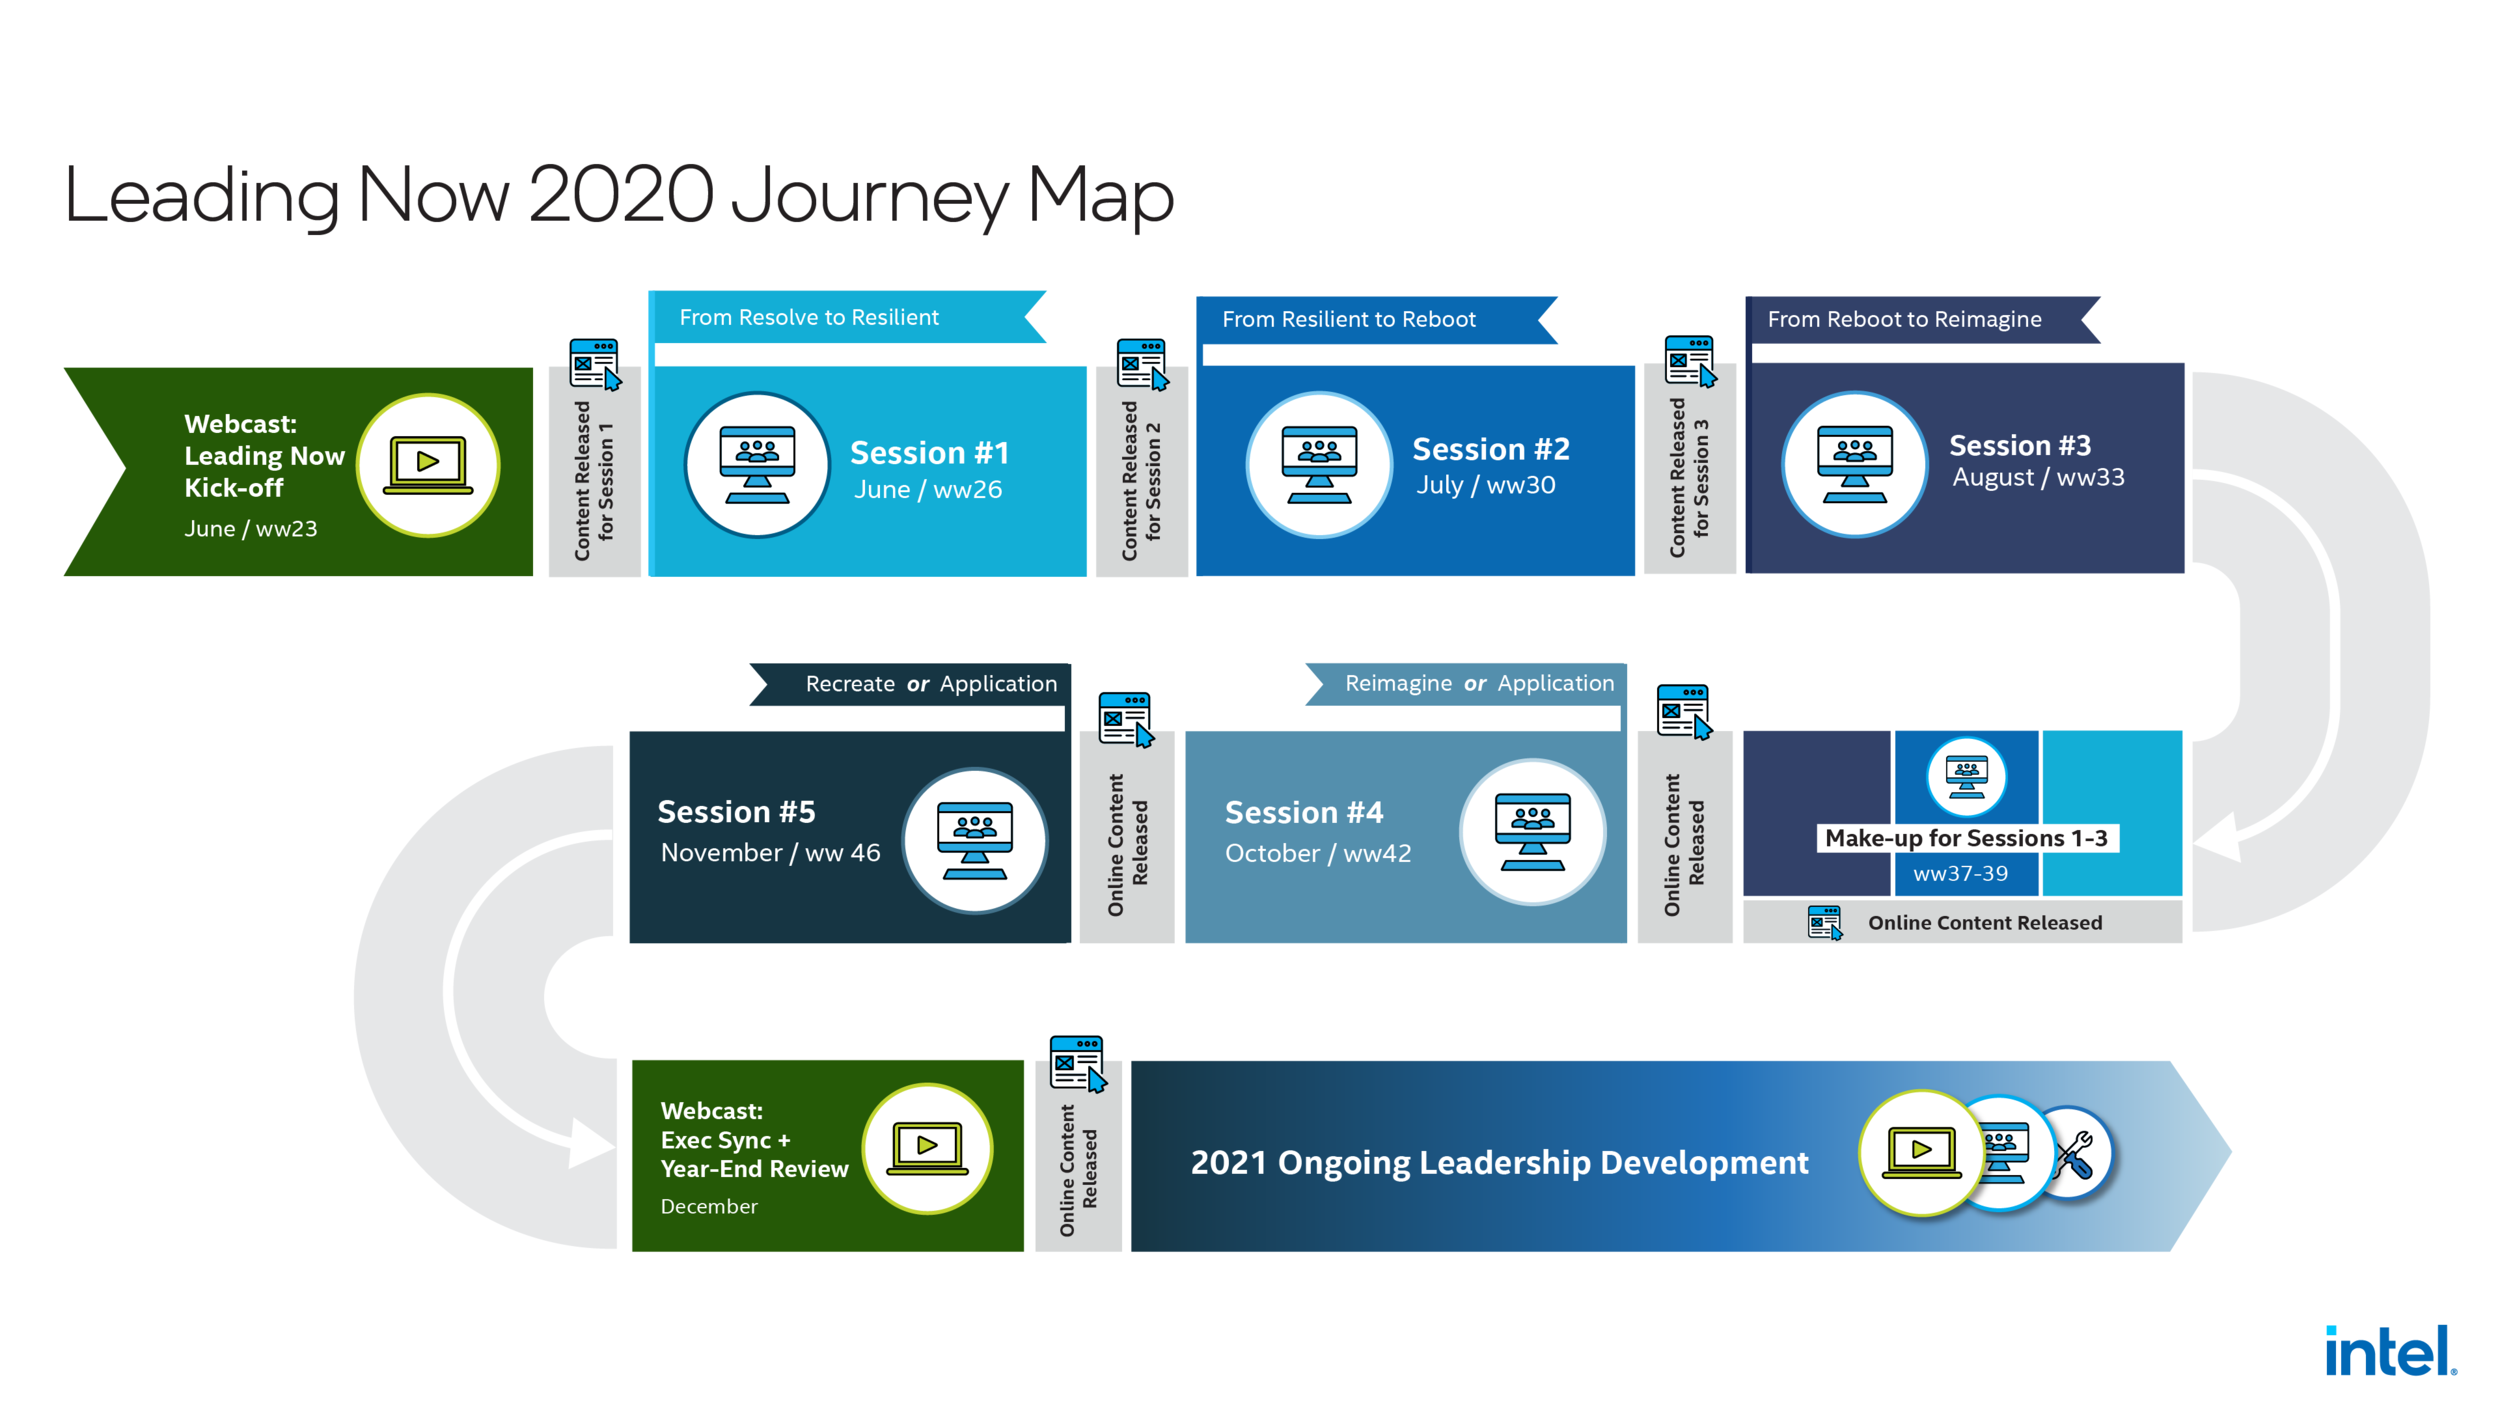 Journey Map for Executive Leadership series in 2020